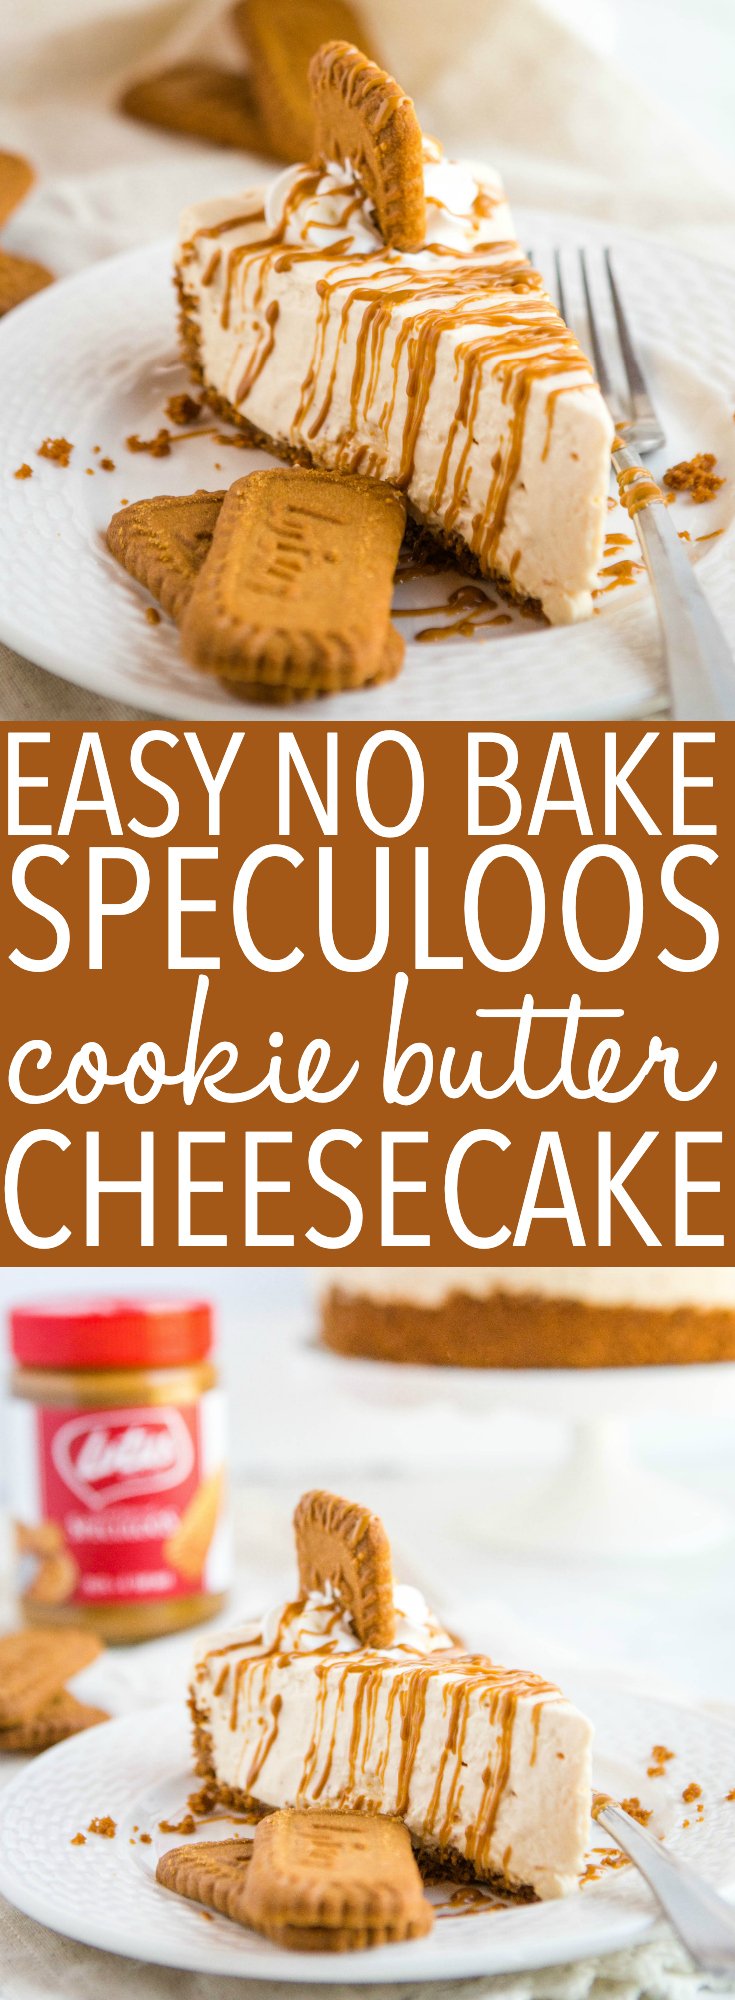 Easy No Bake Speculoos Cookie Butter Cheesecake Pinterest